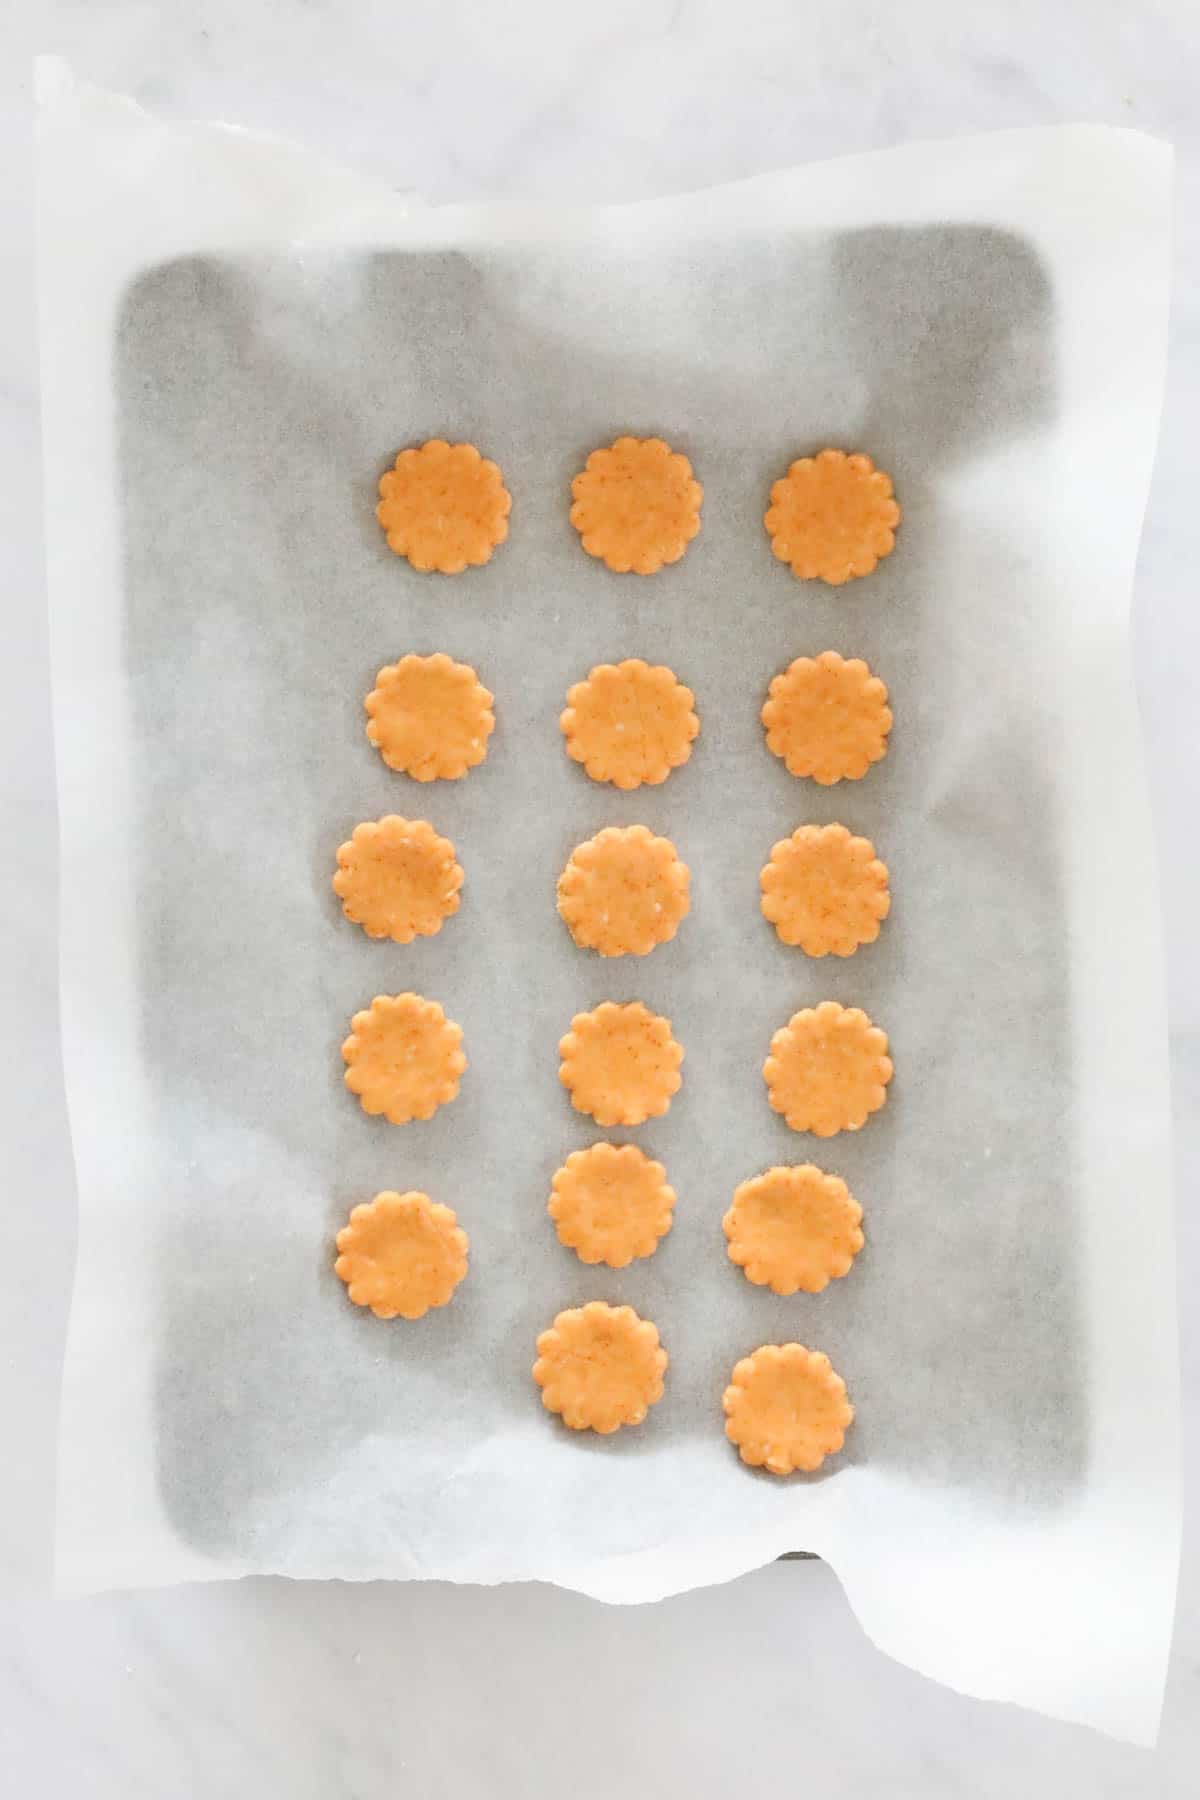 Round crackers on a tray.